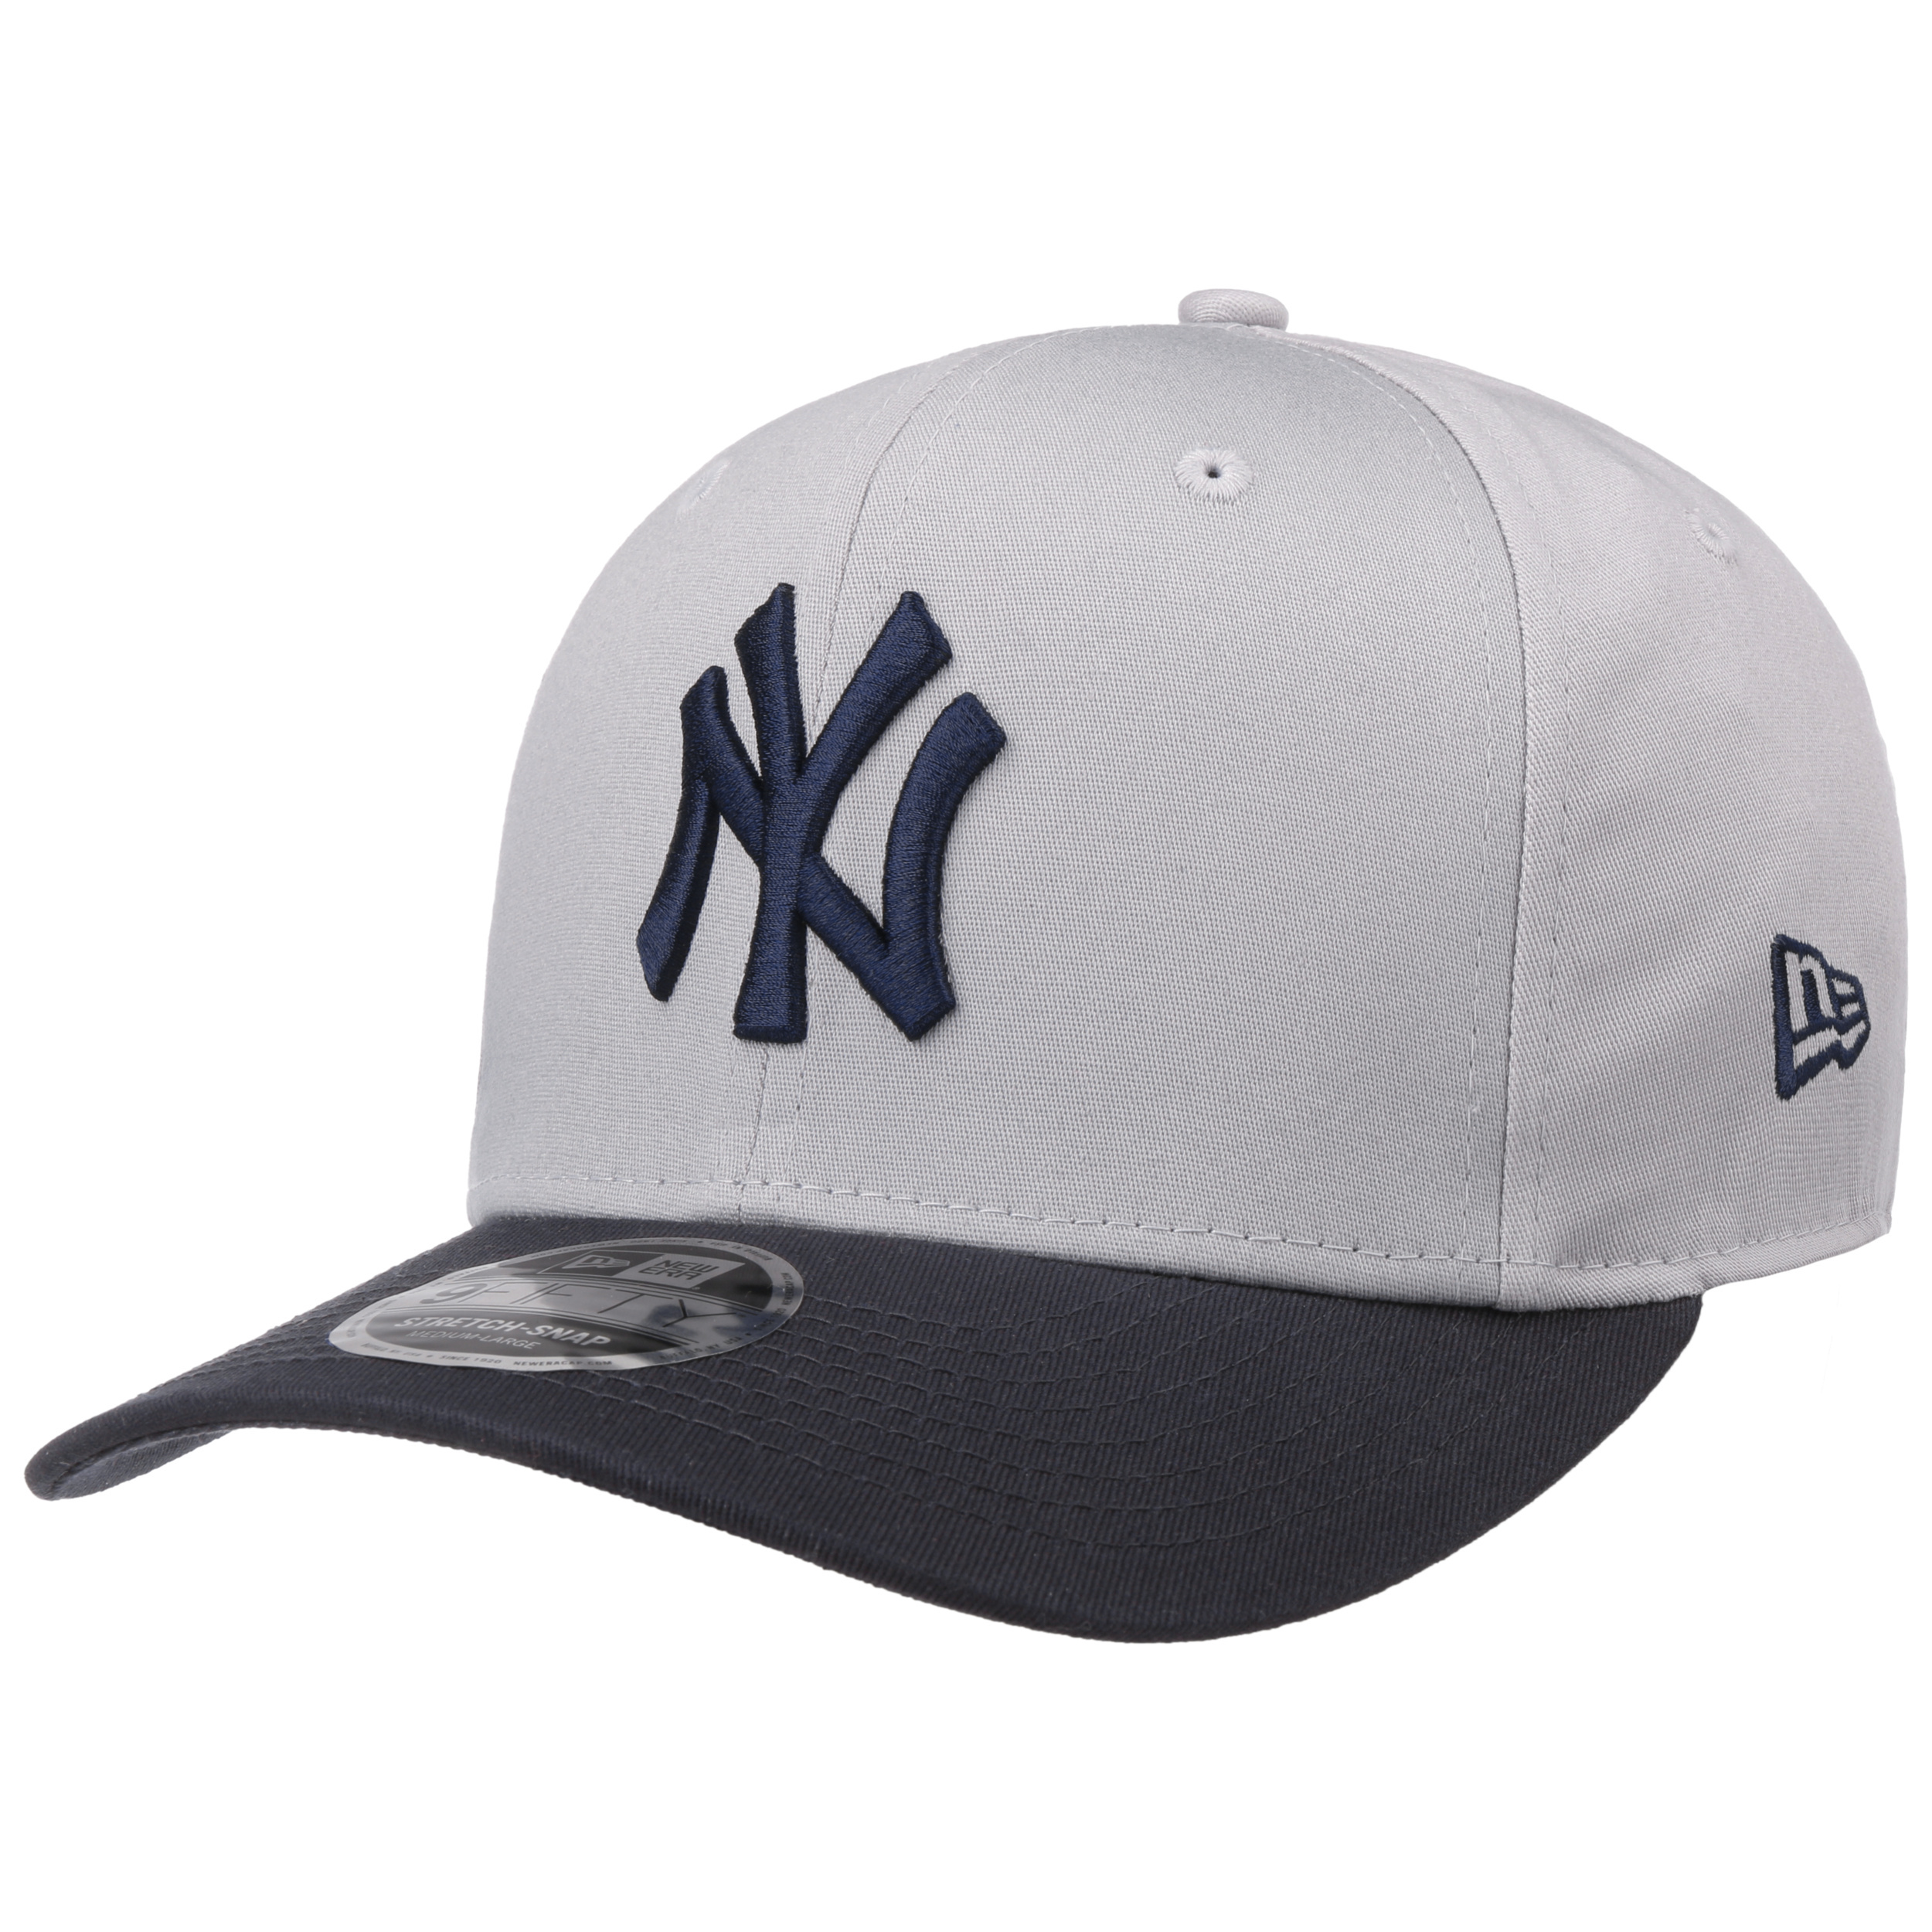 - Cap New 9Fifty New Snap 38,95 Yankees € by Era York